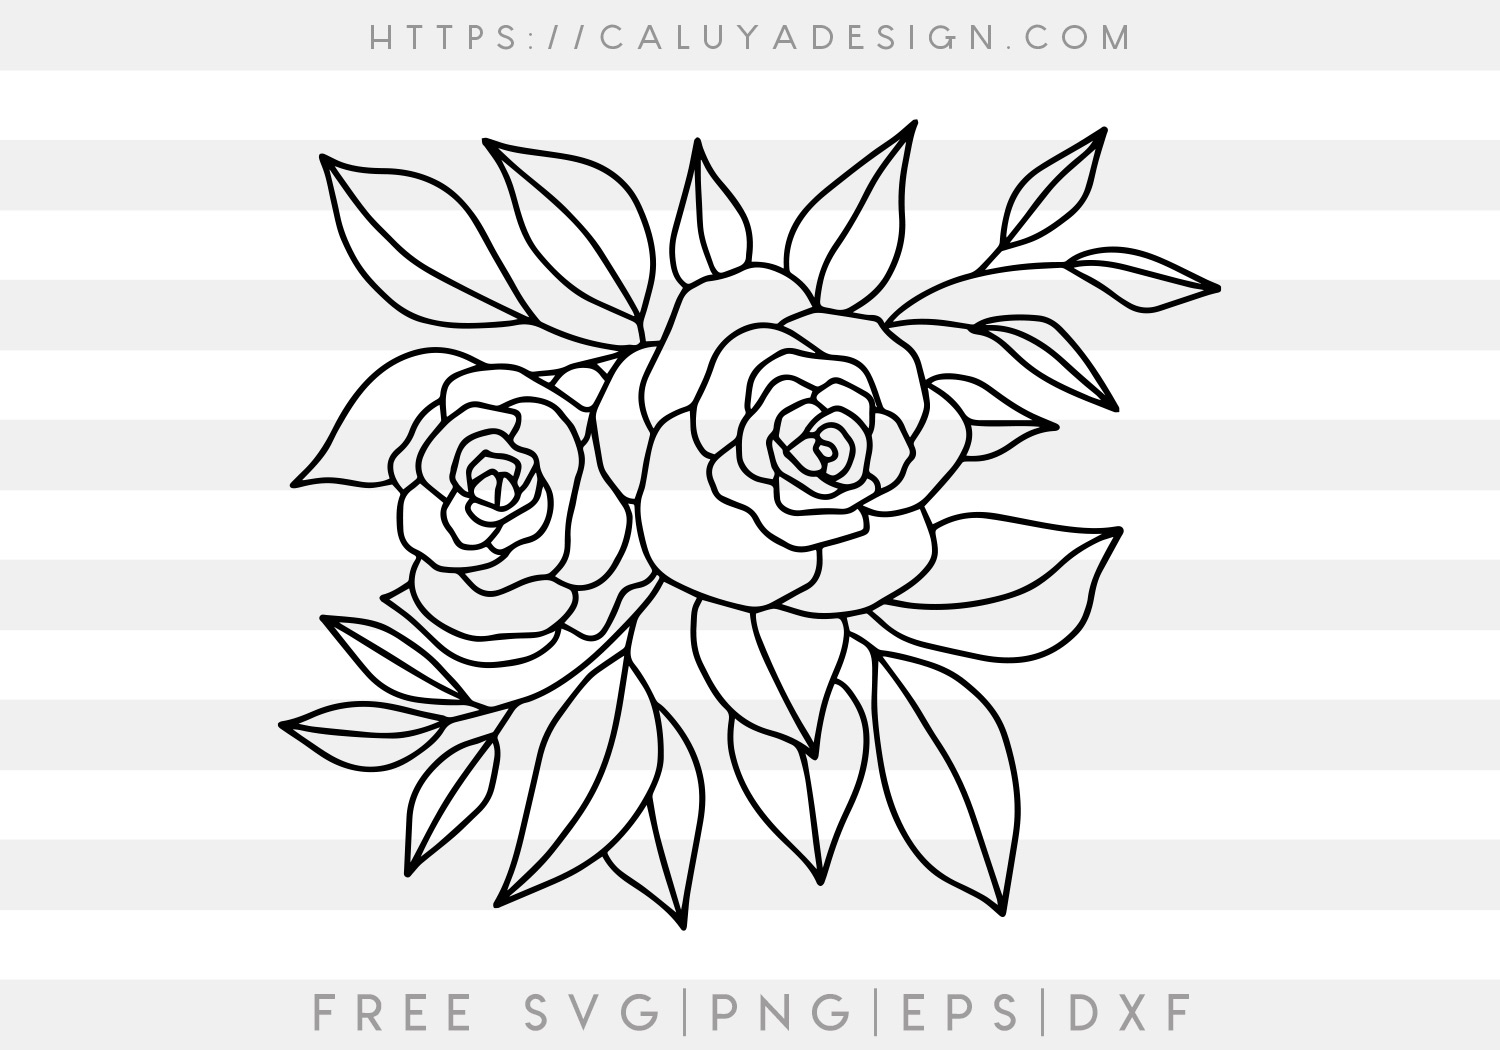 Free Flower Bouquet SVG, PNG, EPS & DXF by Caluya Design